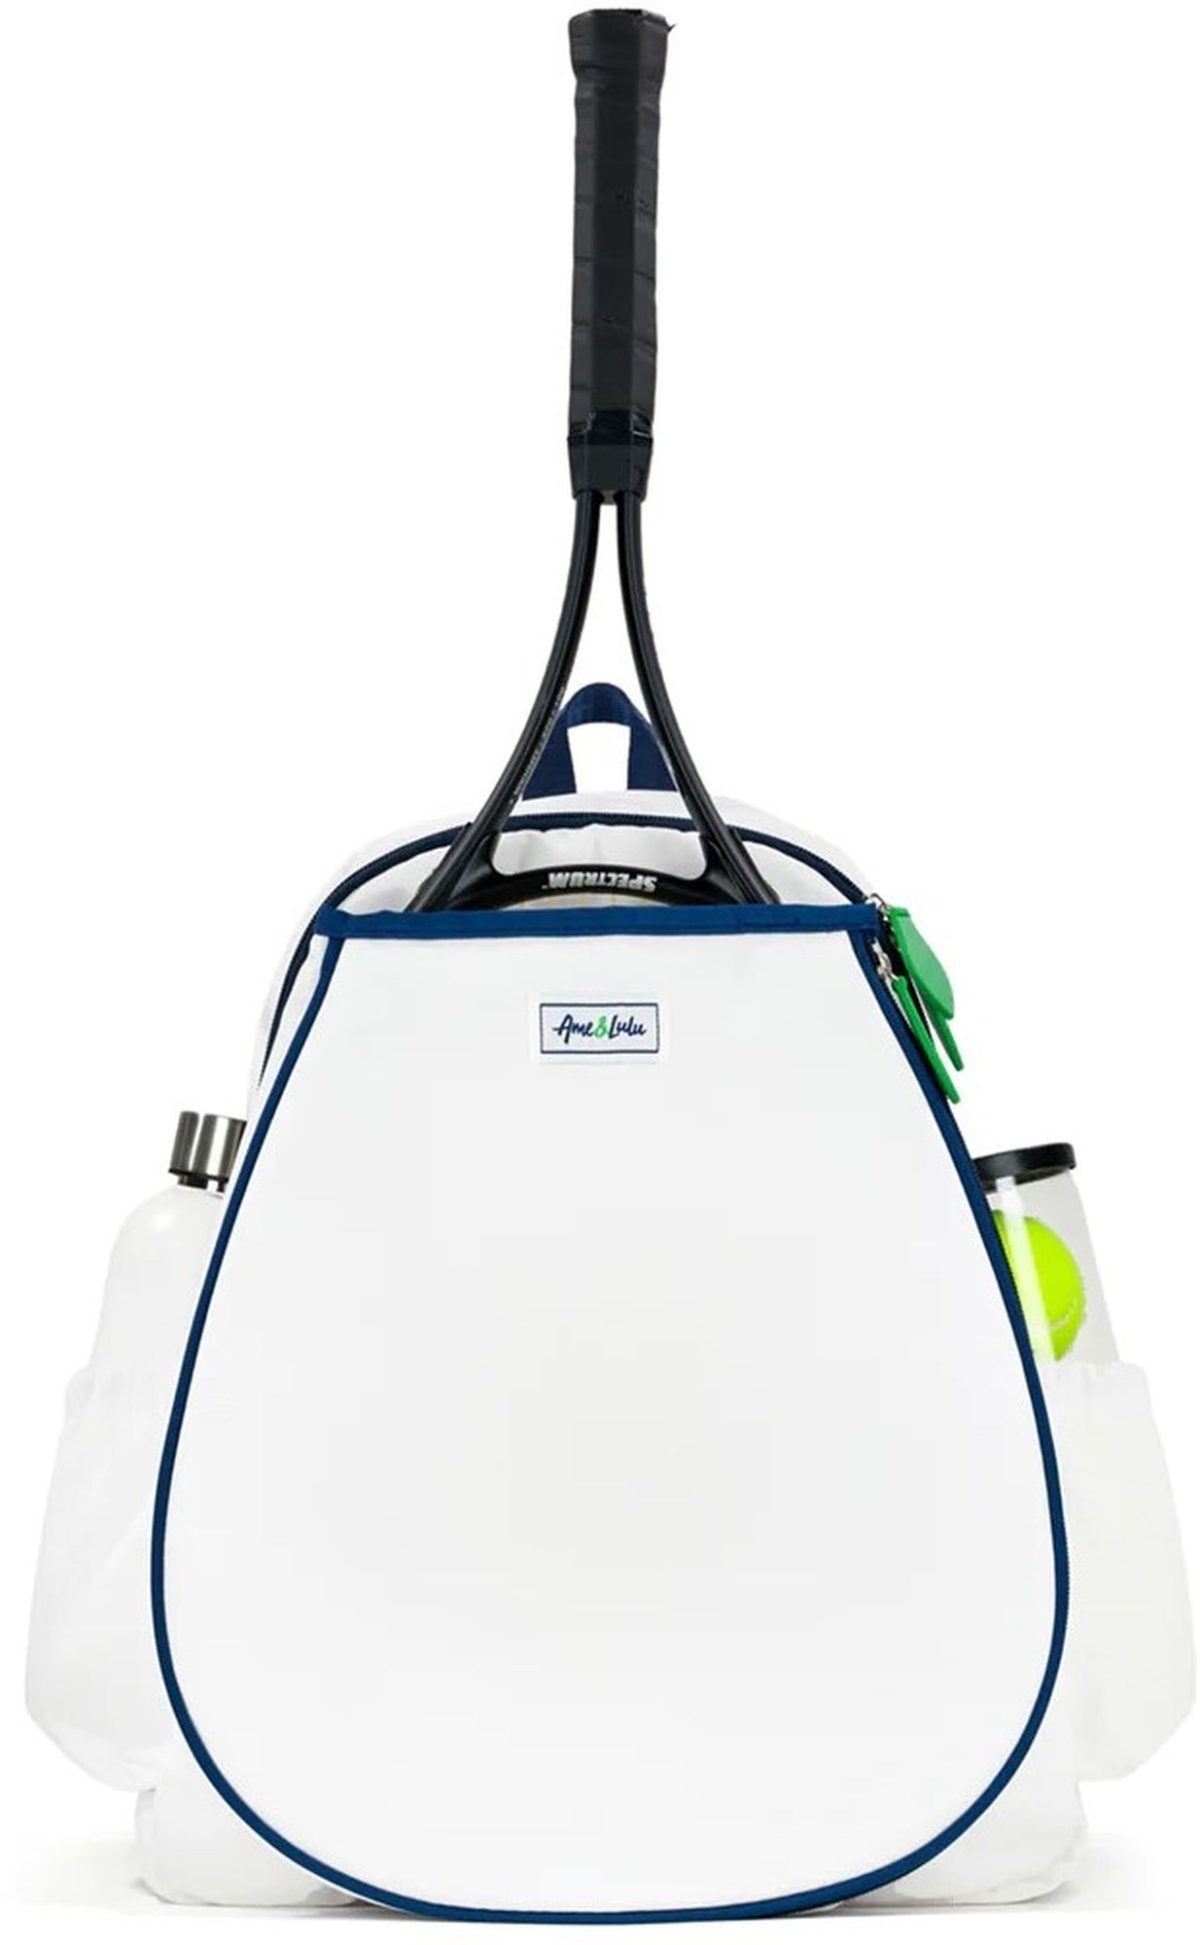 Ame & Lulu Game On Tennis Backpack (White/Navy/Green)